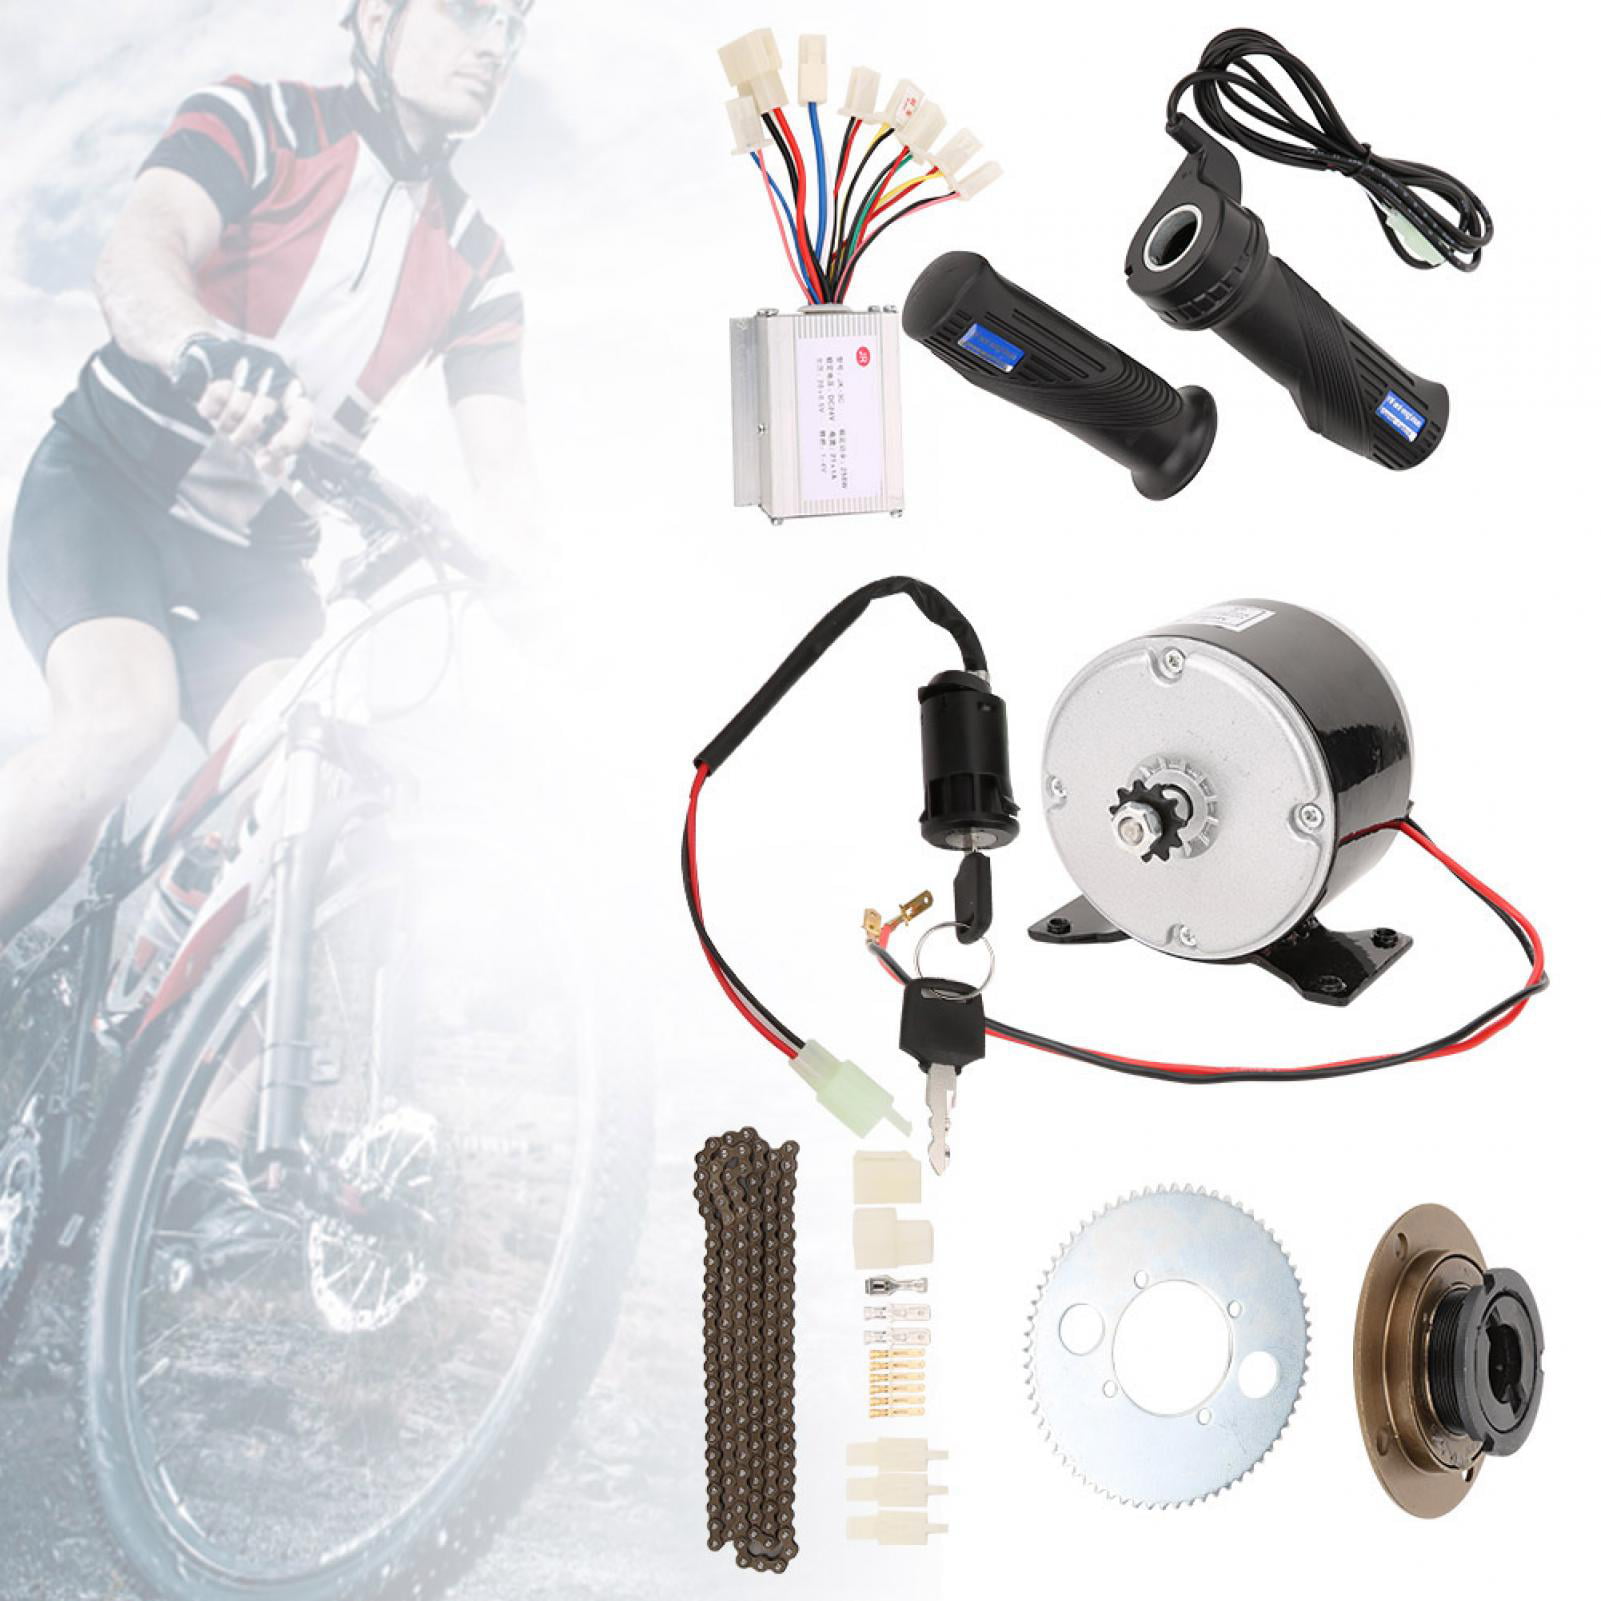 250W 24V electric brush motor conversion kit bicycle w control & 7 accessories 